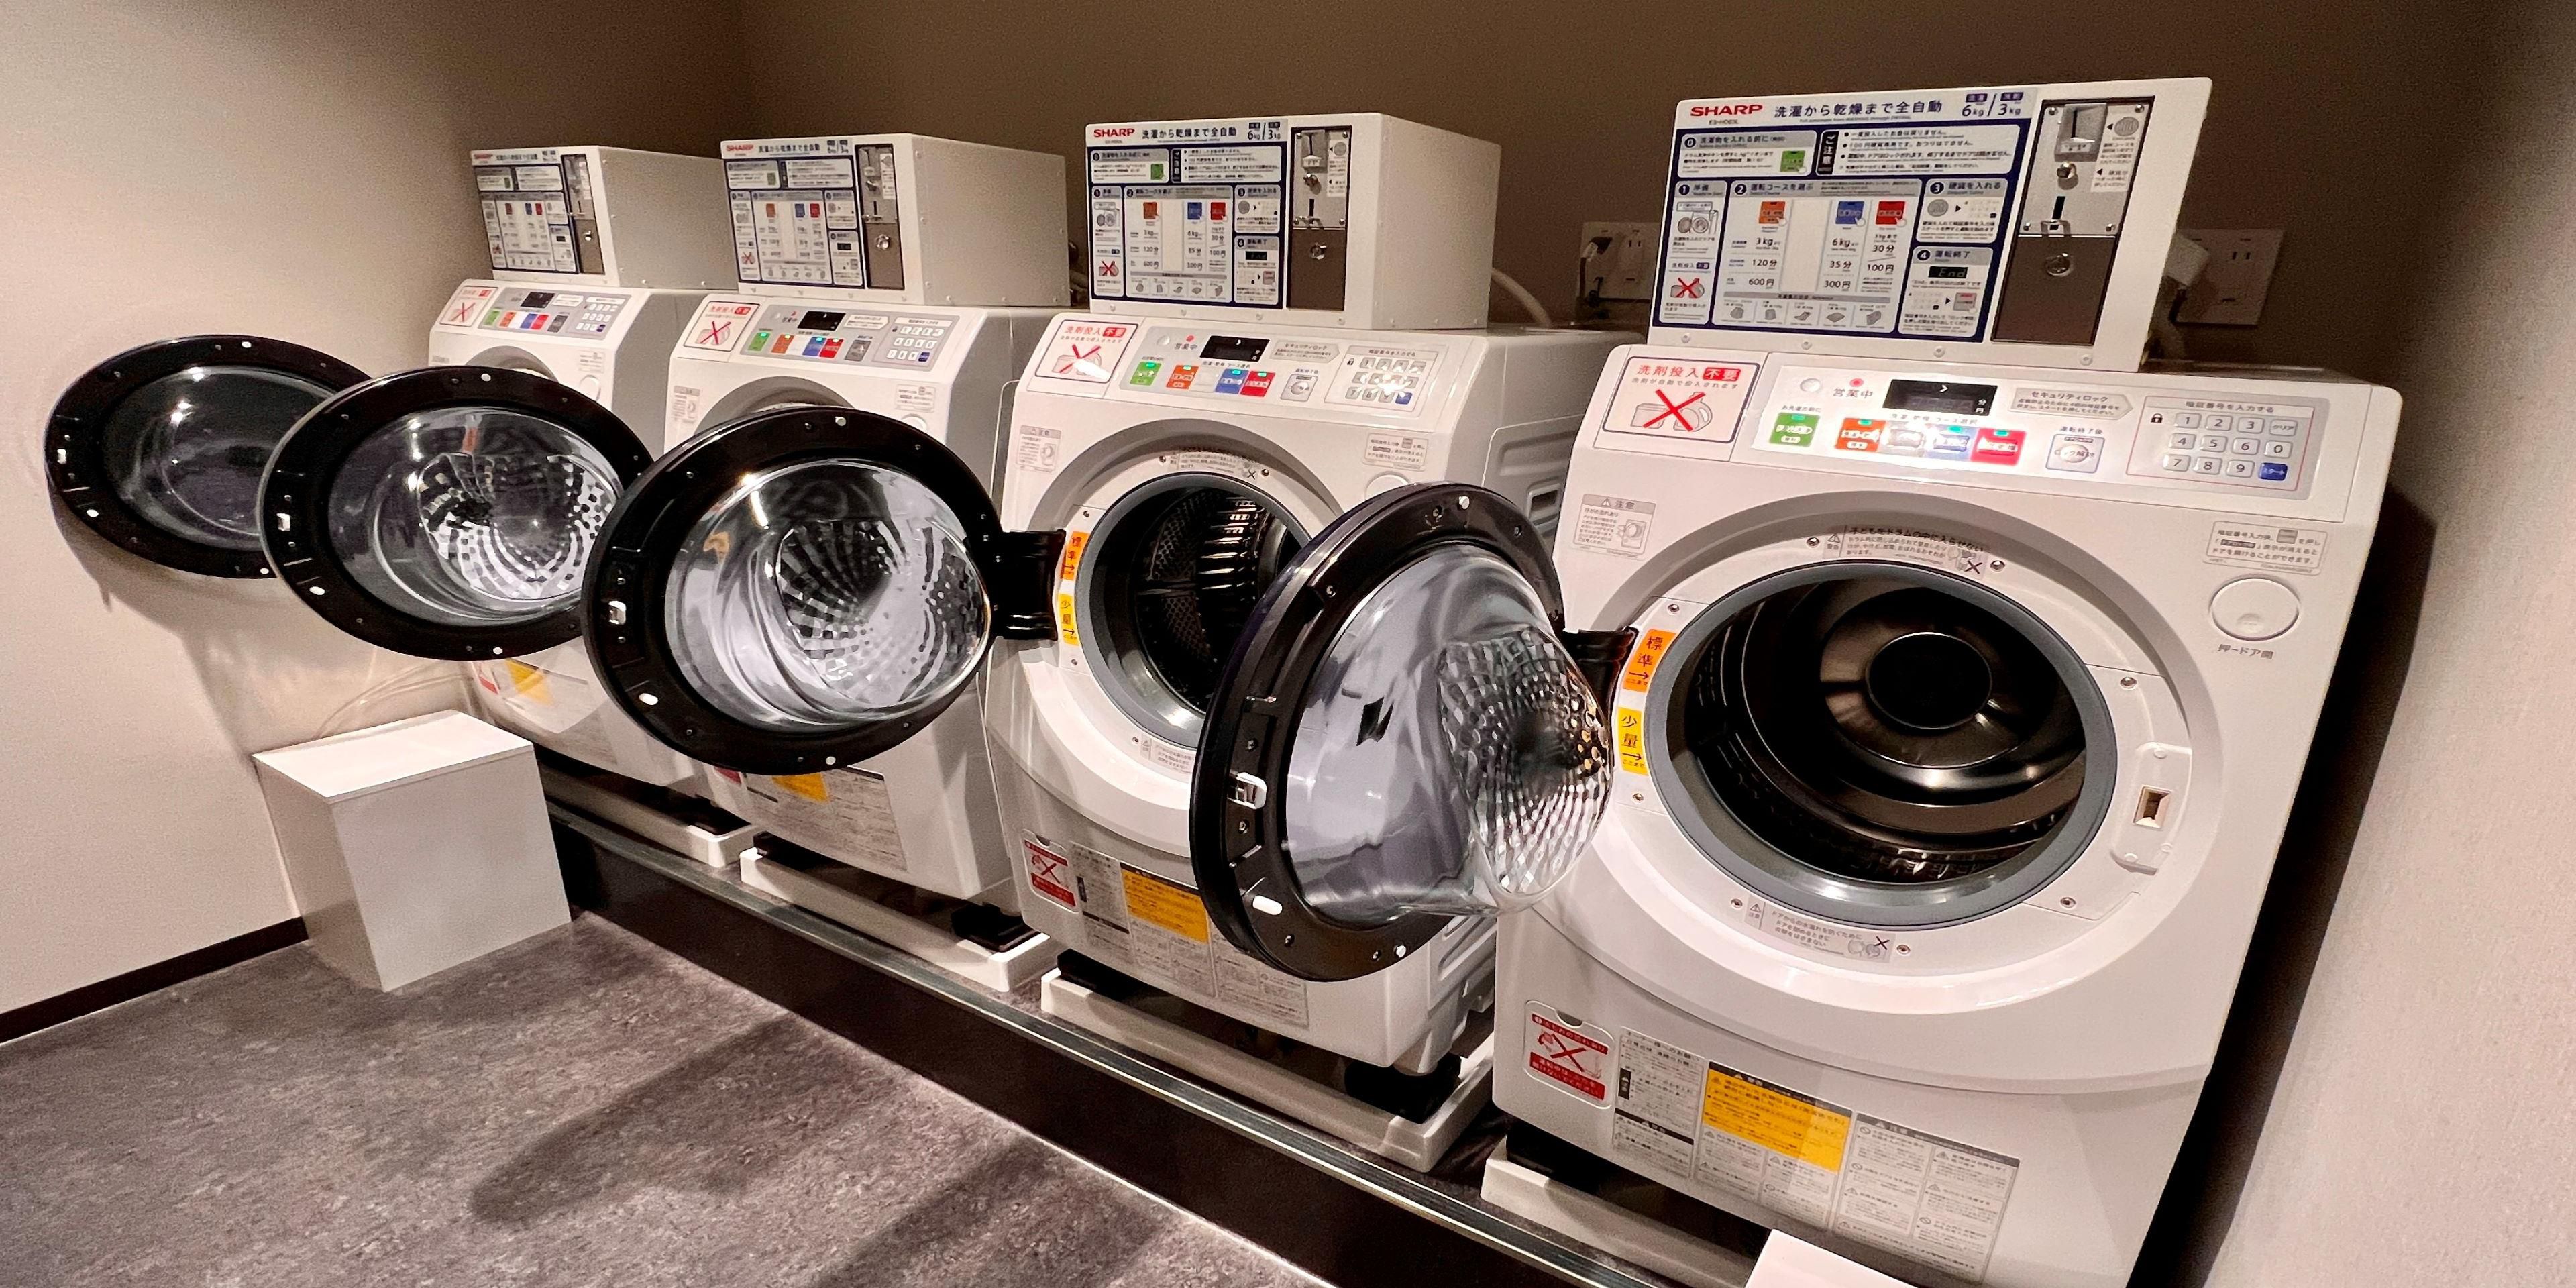 With our self-service laundry room, you won't have to worry about spilling coffee on your favorite shirt or the kids making a mess at dinner.  If you're on a work trip, vacation, or staycation, you'll appreciate having the comforts of home when you need them most.